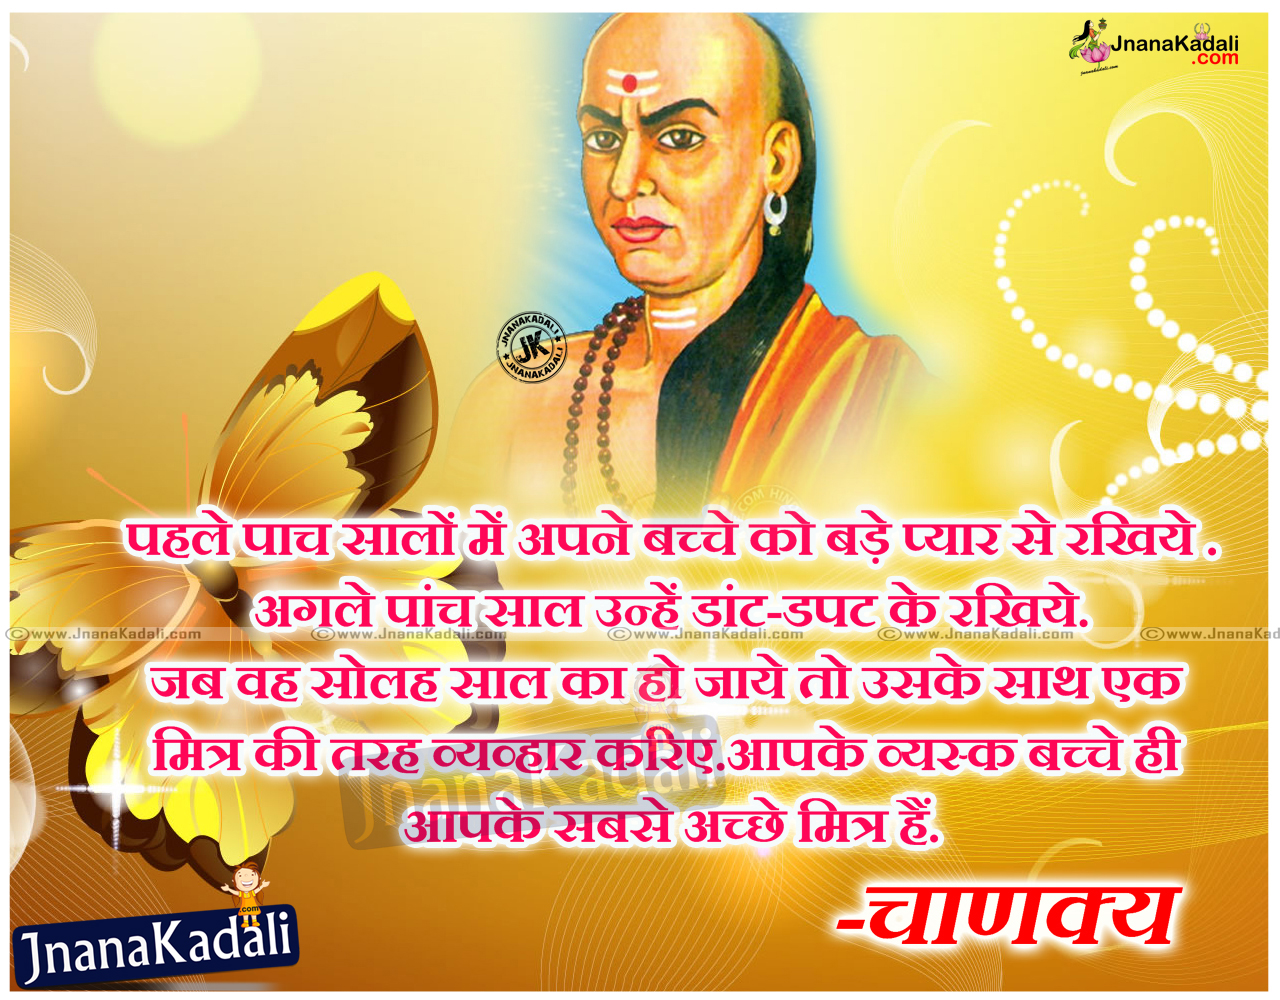 Chanakya Niti in Hindi Free Download Wallpapers Images Pictures  Inspiring  Quotes  Inspirational Motivational Quotations Thoughts Sayings with  Images Anmol Vachan Suvichar Inspirational Stories Essay Speeches and  Motivational Videos Golden 